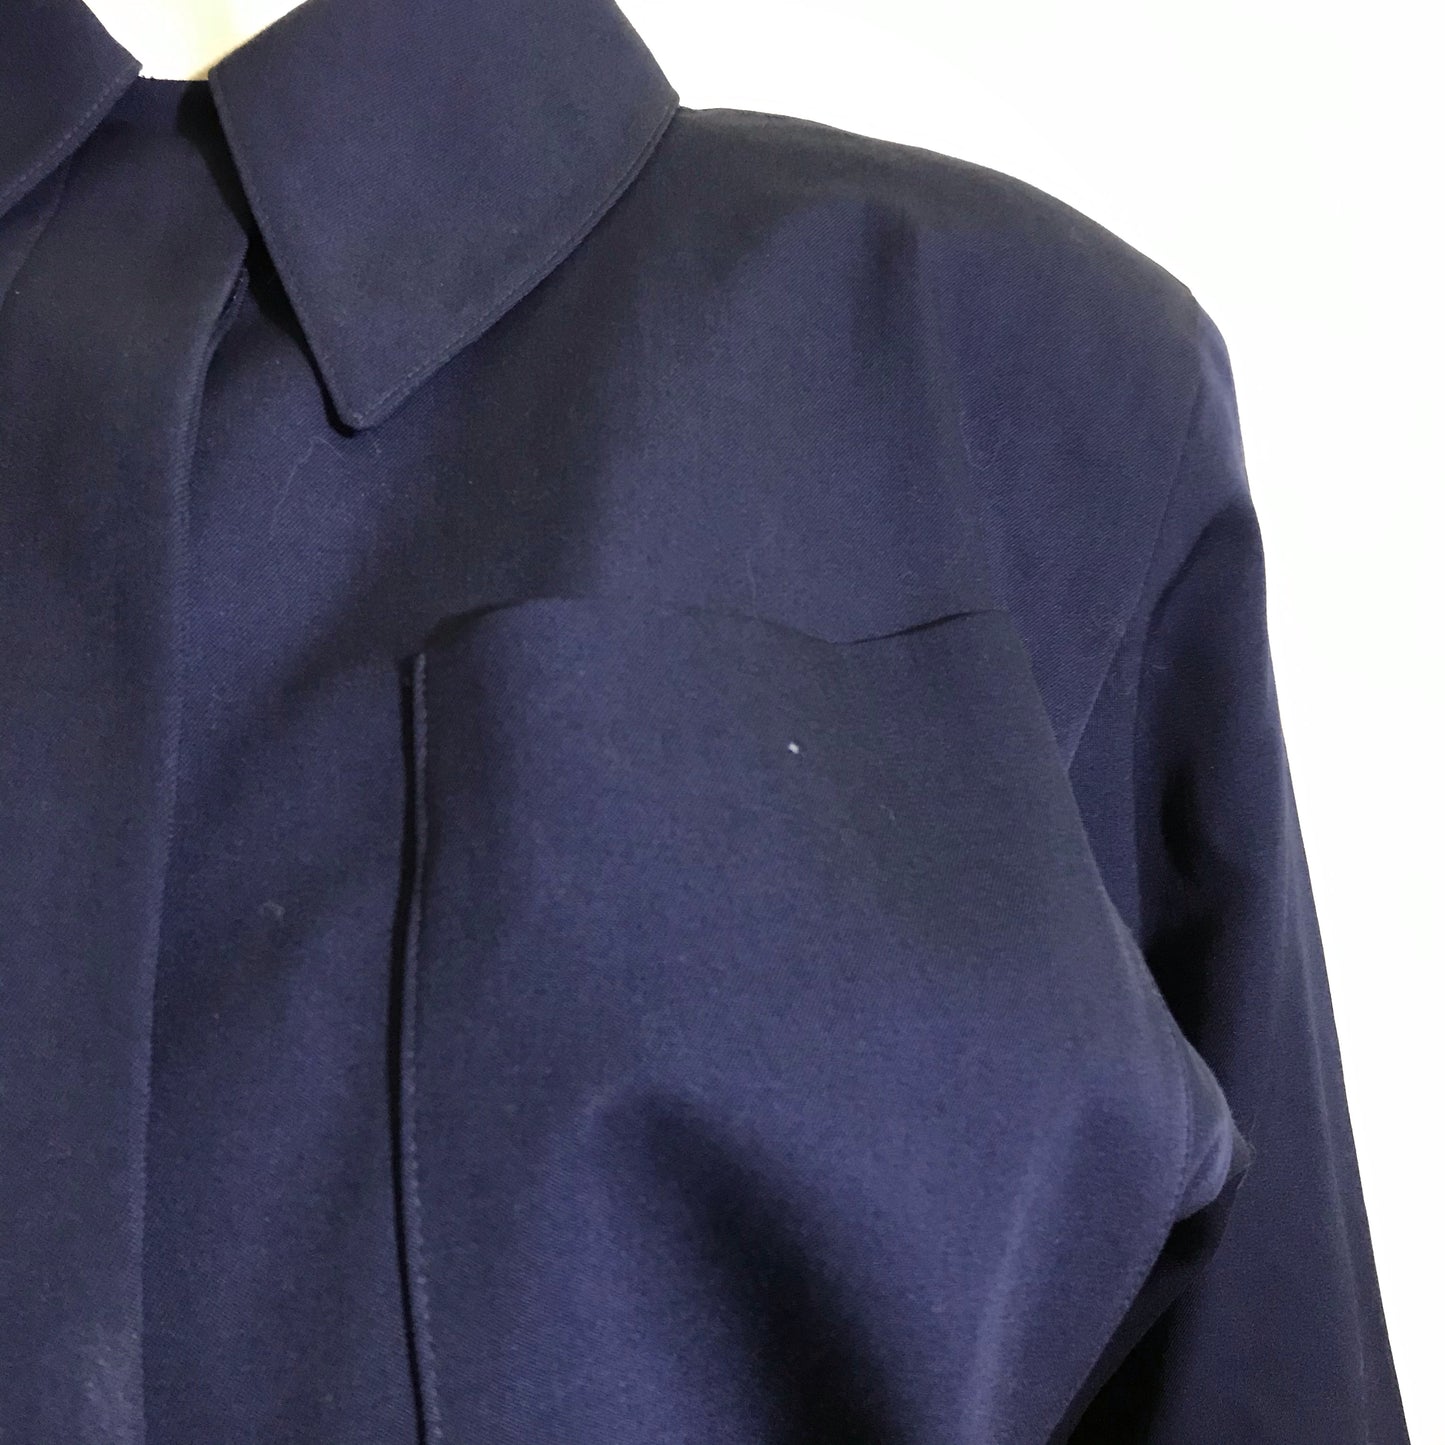 Nipped Waist Blue Wool Pocket Trimmed Suit Jacket circa 1980s